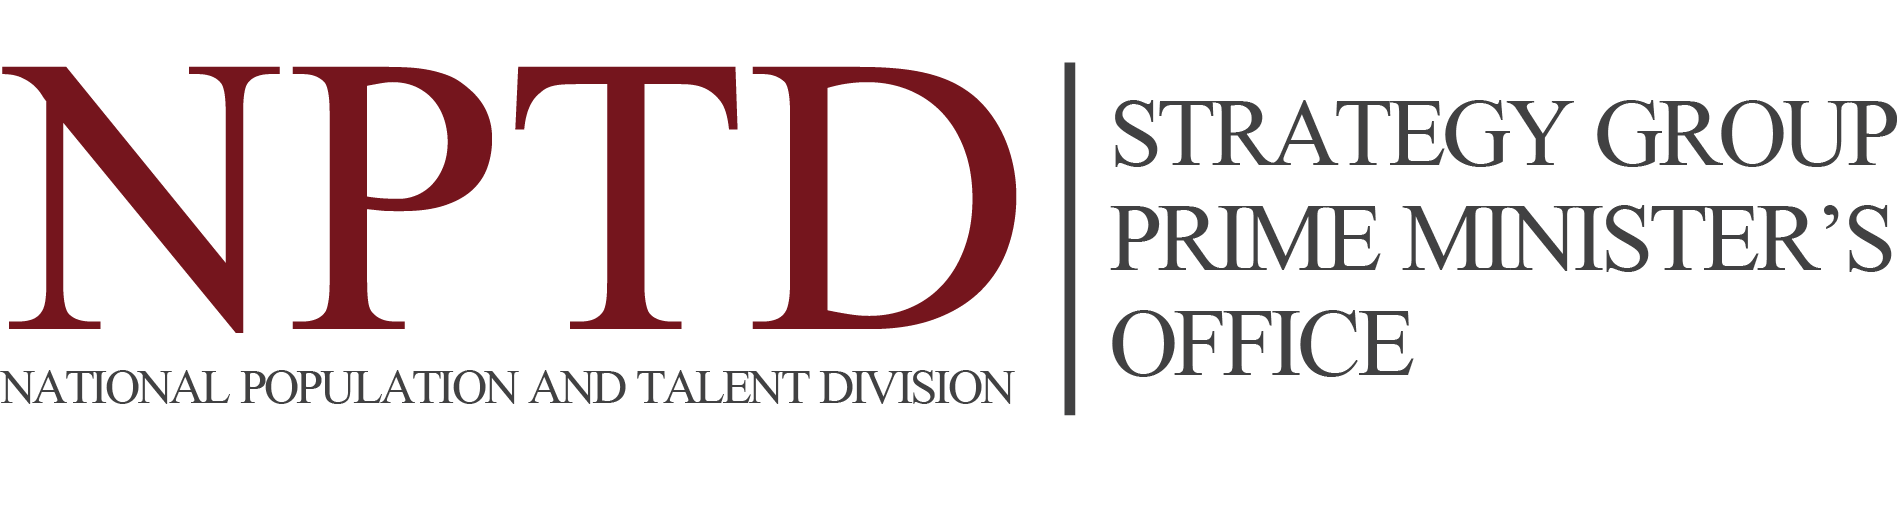 National Population and Talent Division